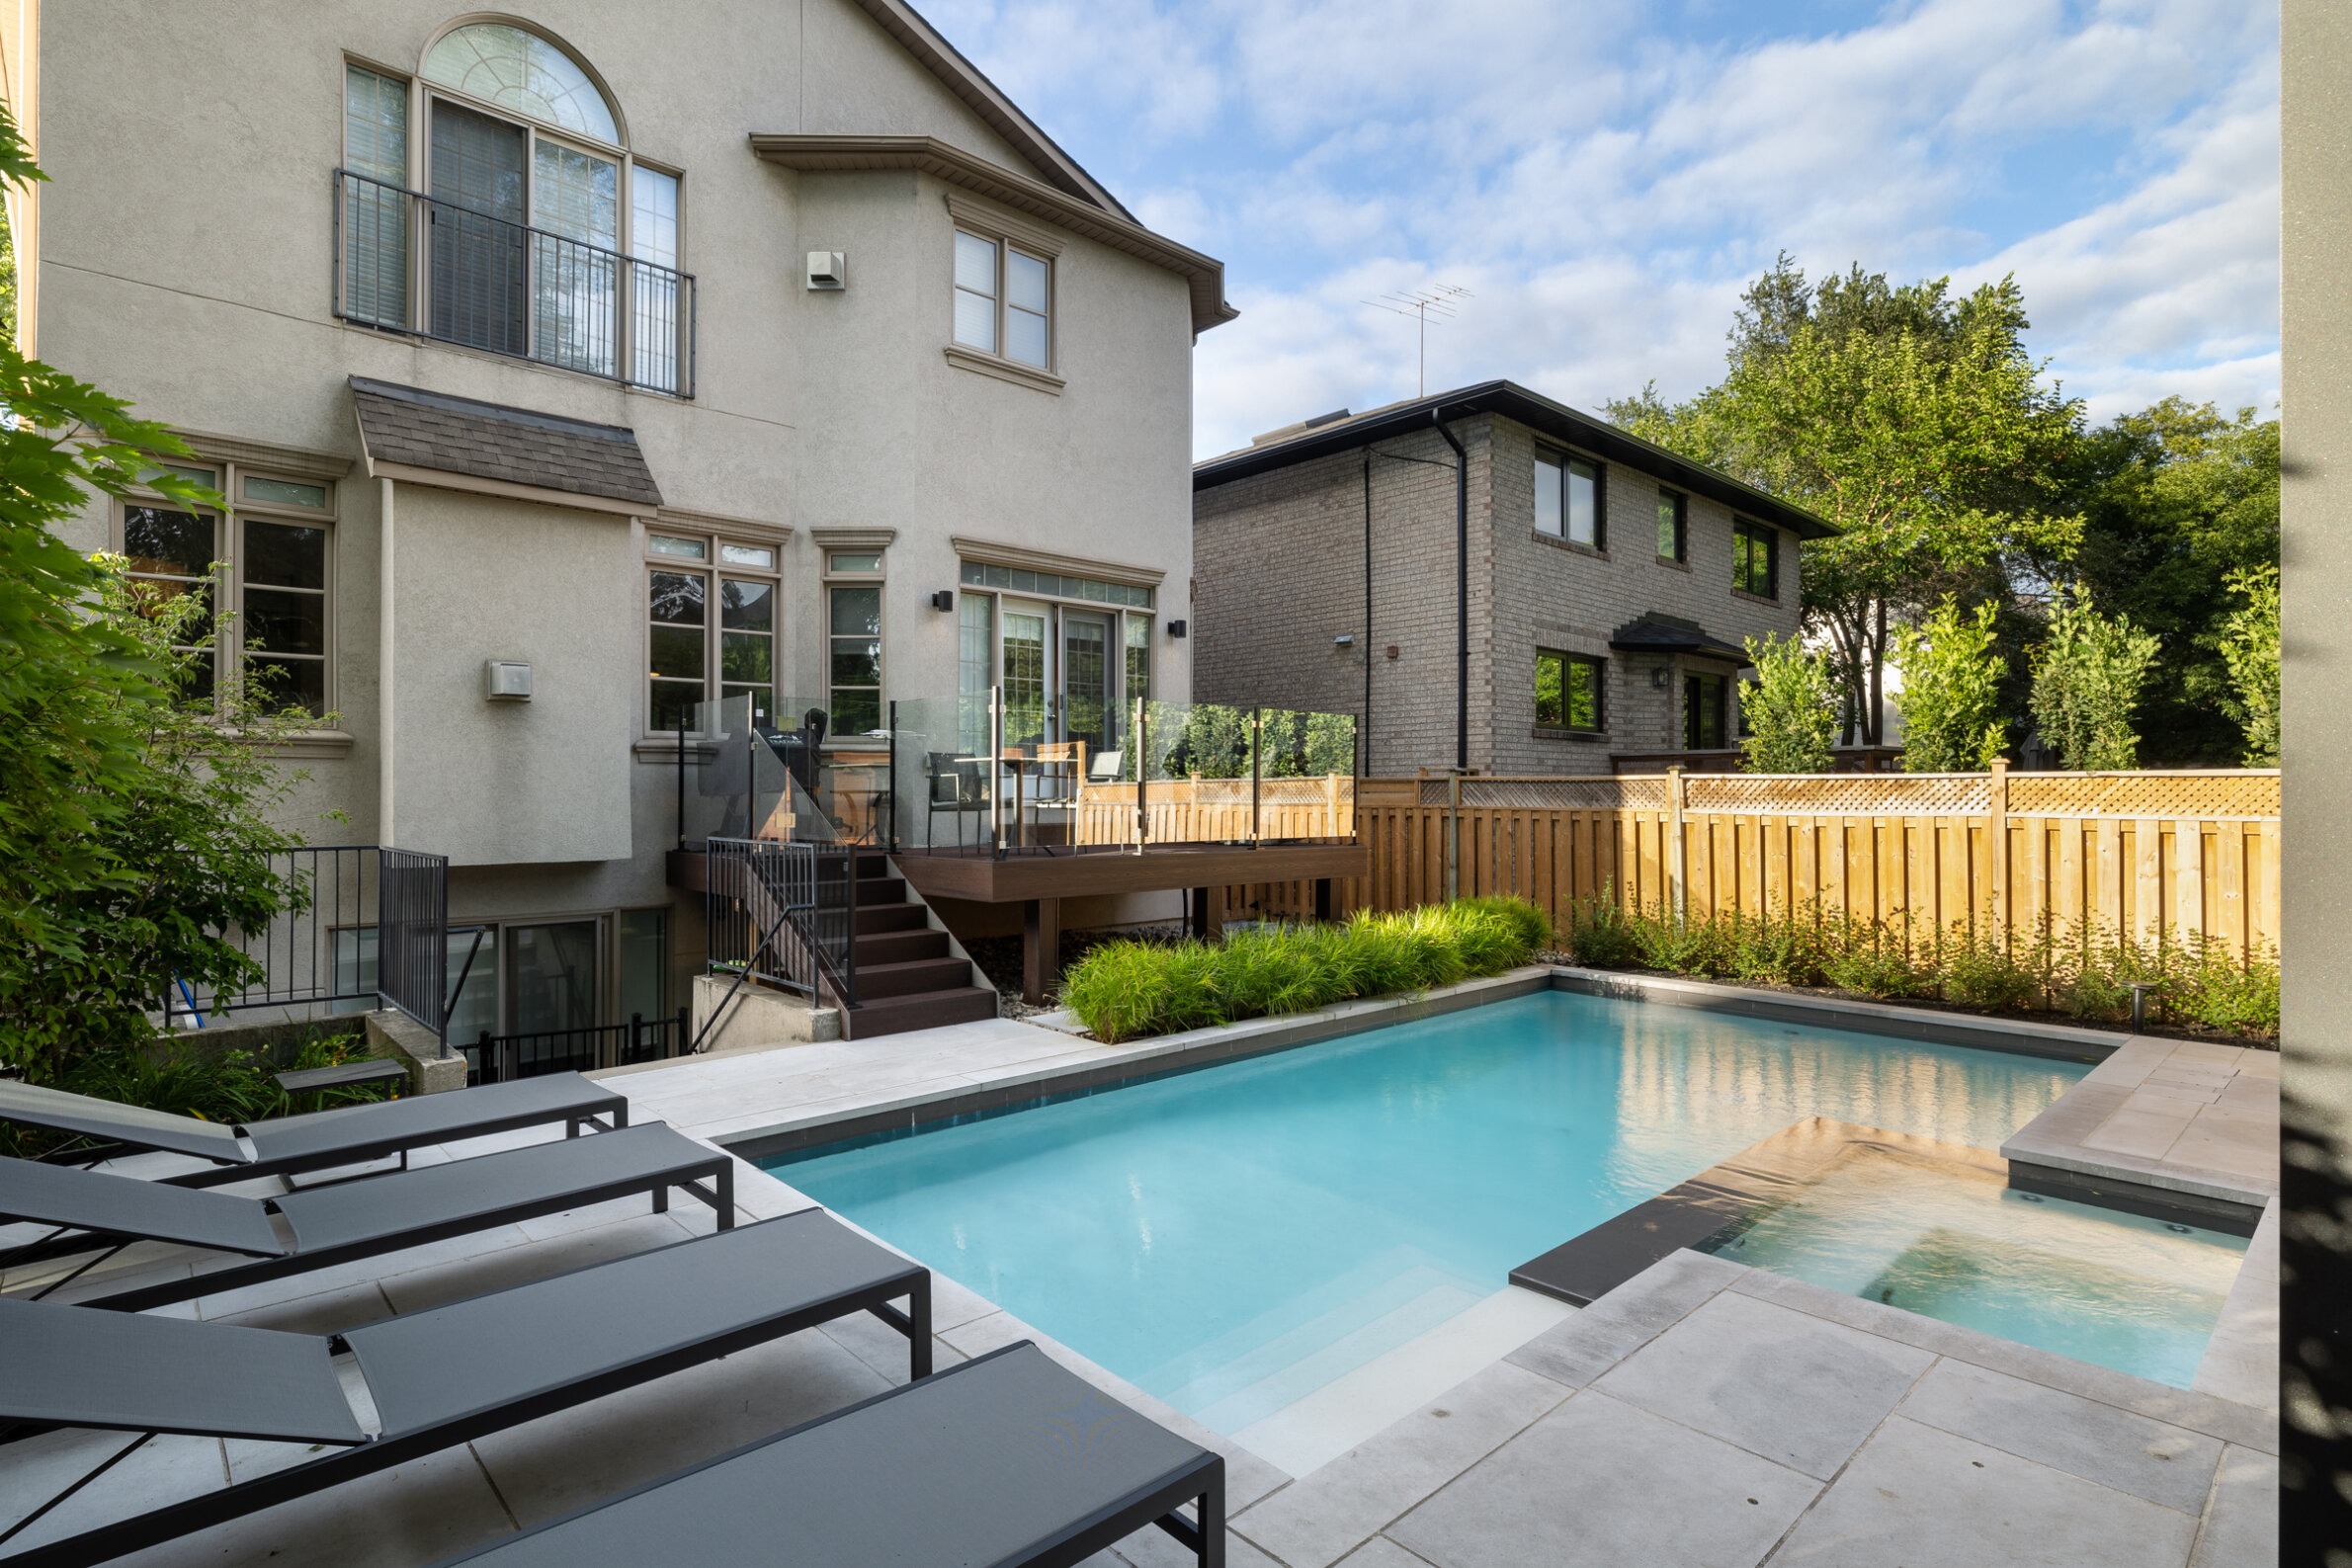 A residential backyard with a clear pool, patio area, outdoor furniture, wooden fence, and two-story houses surrounded by greenery under a partly cloudy sky.